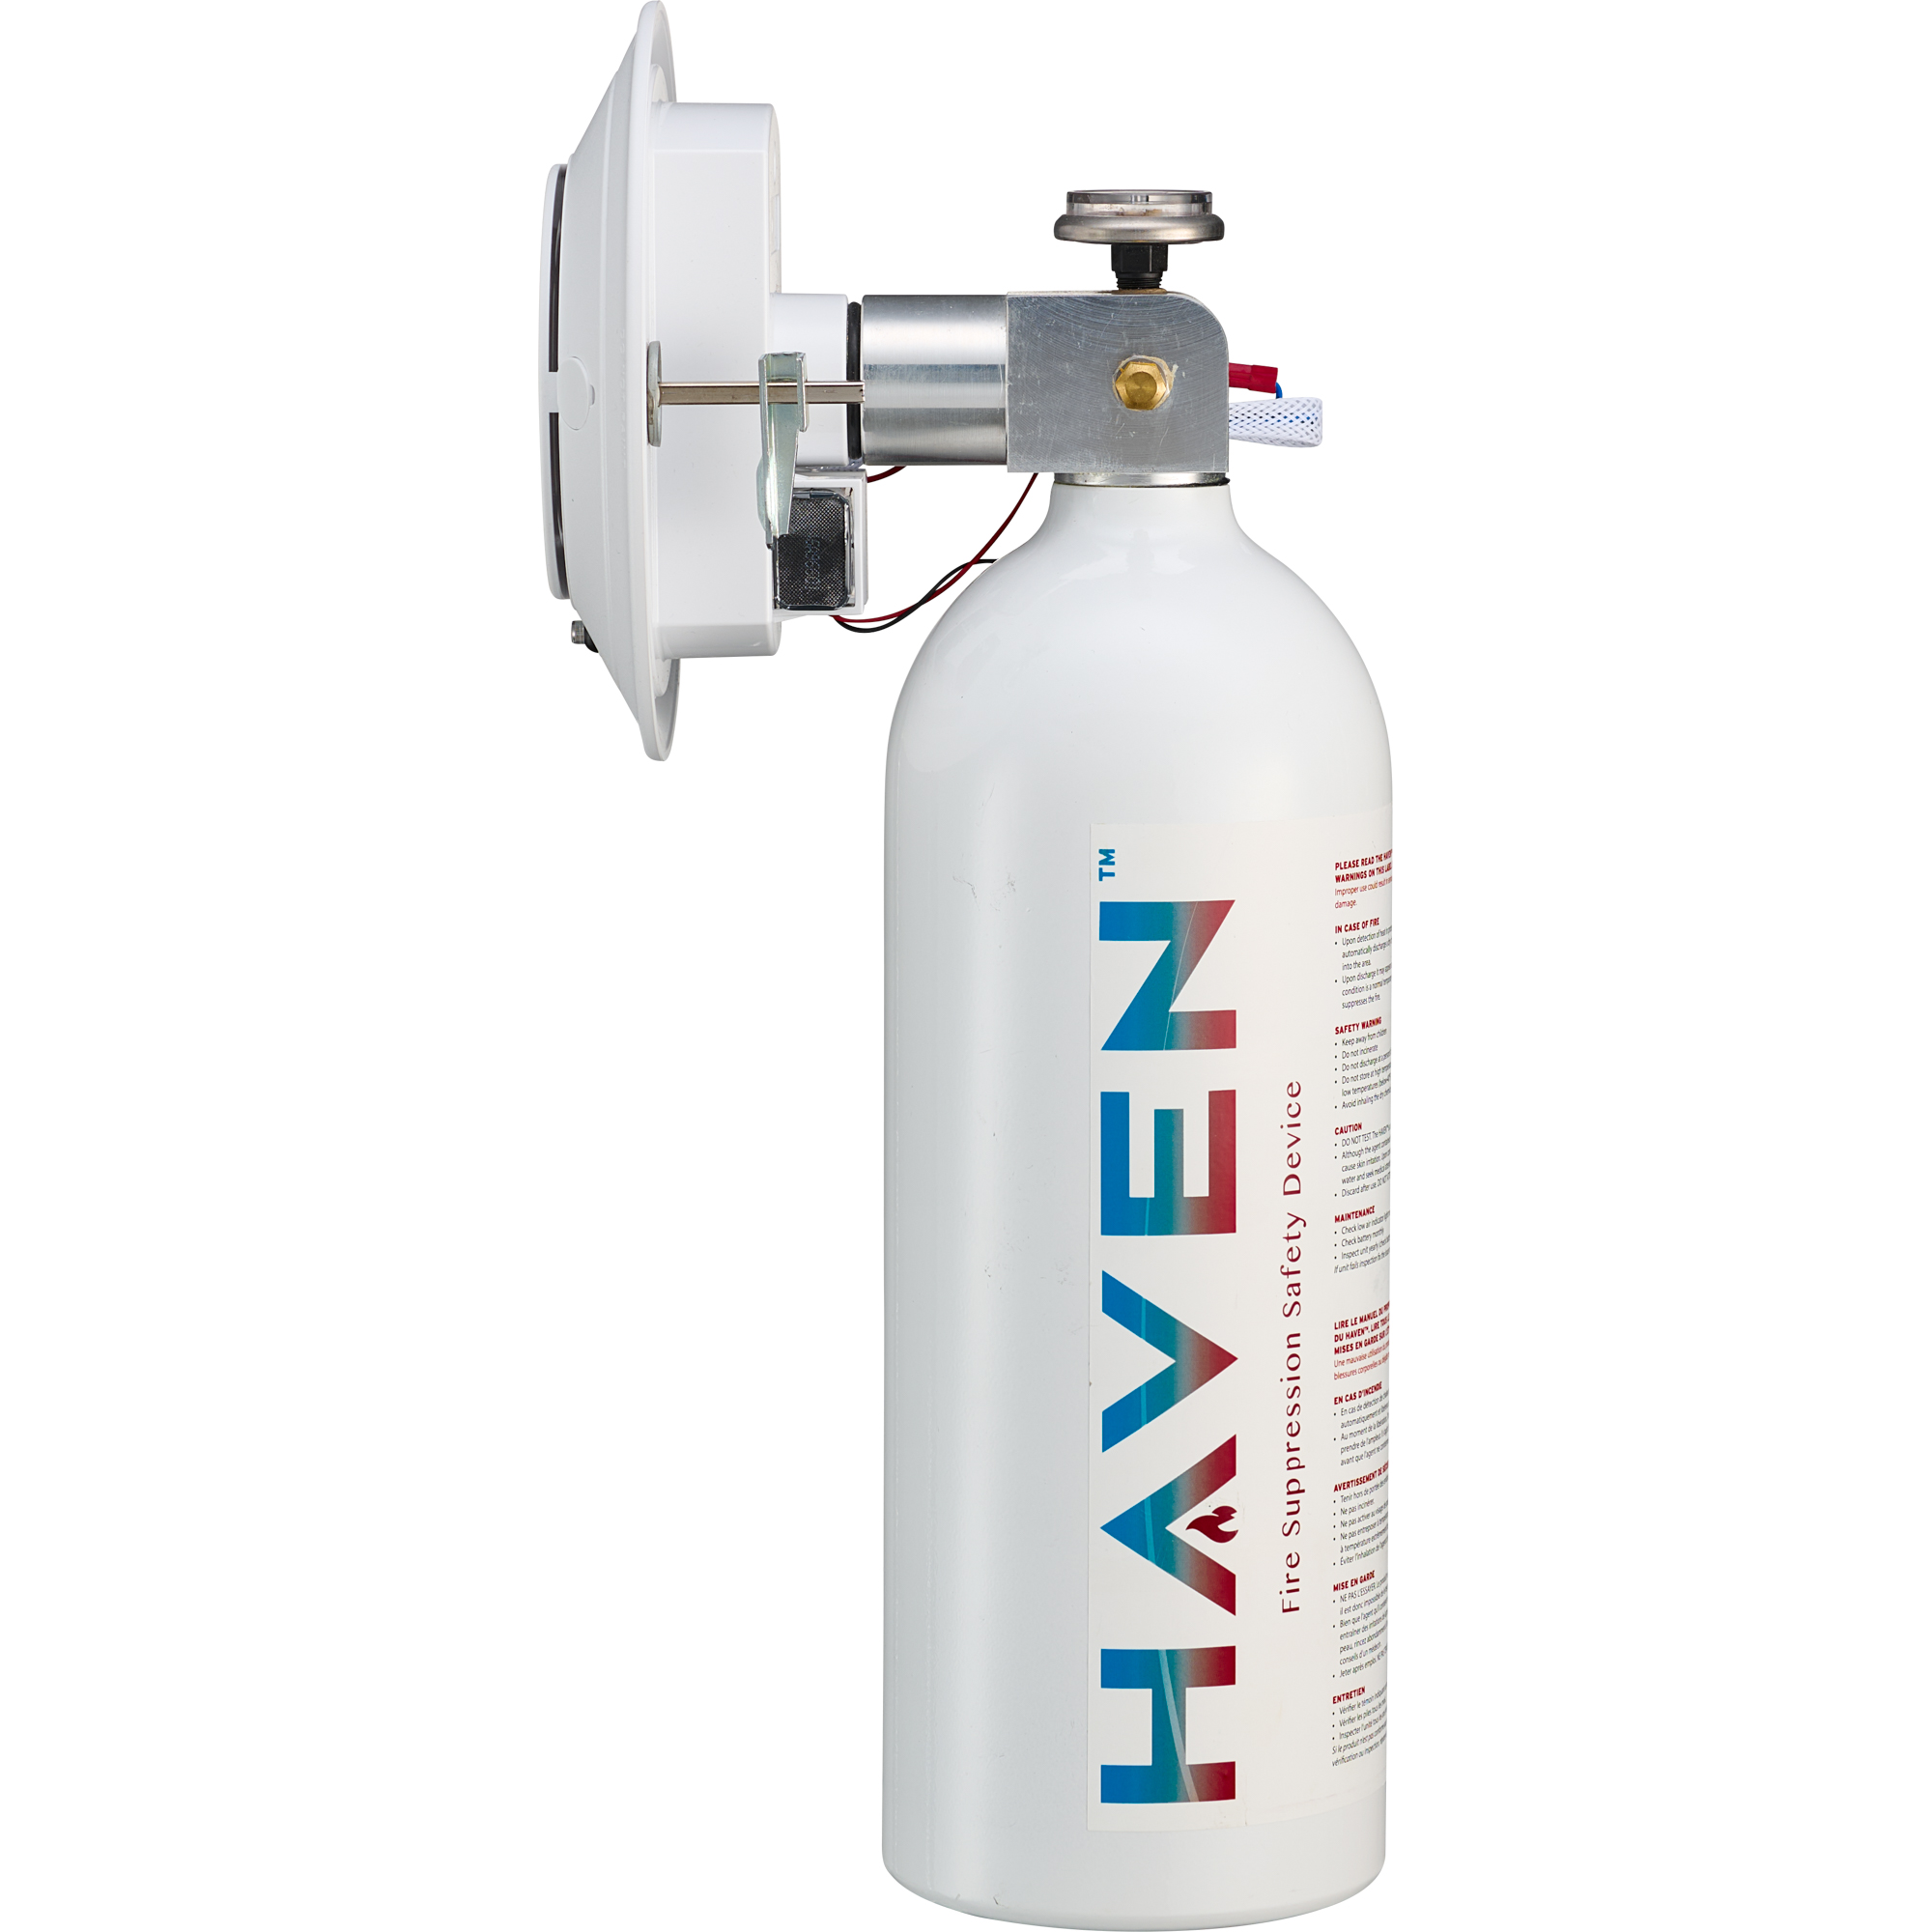 HAVEN 5lb Fire Suppression Safety Device 200F - 93C Rated